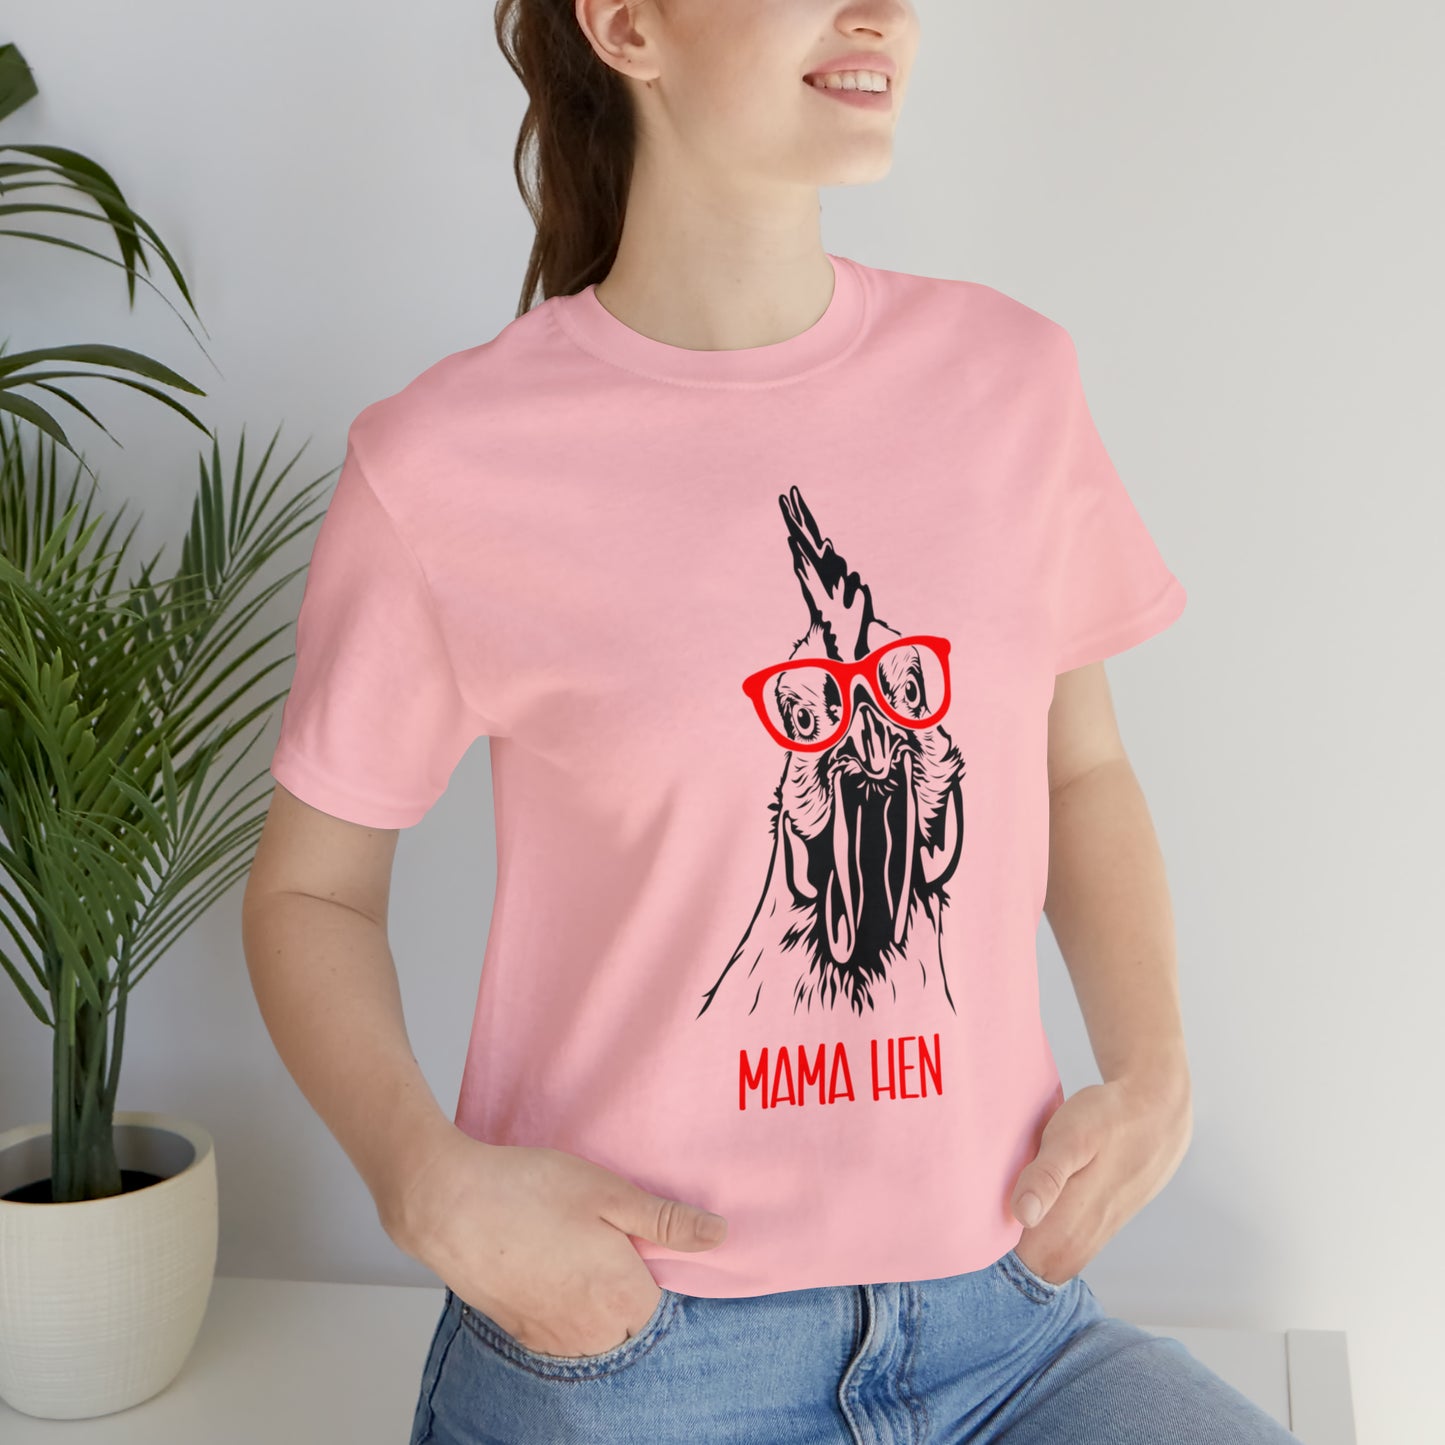 Chicken Mama: Quirky Chick with Red Glasses T-Shirt, Cute Chicken shirt, Pink Chicken with Glasses Shirt, Farm Life Shirt